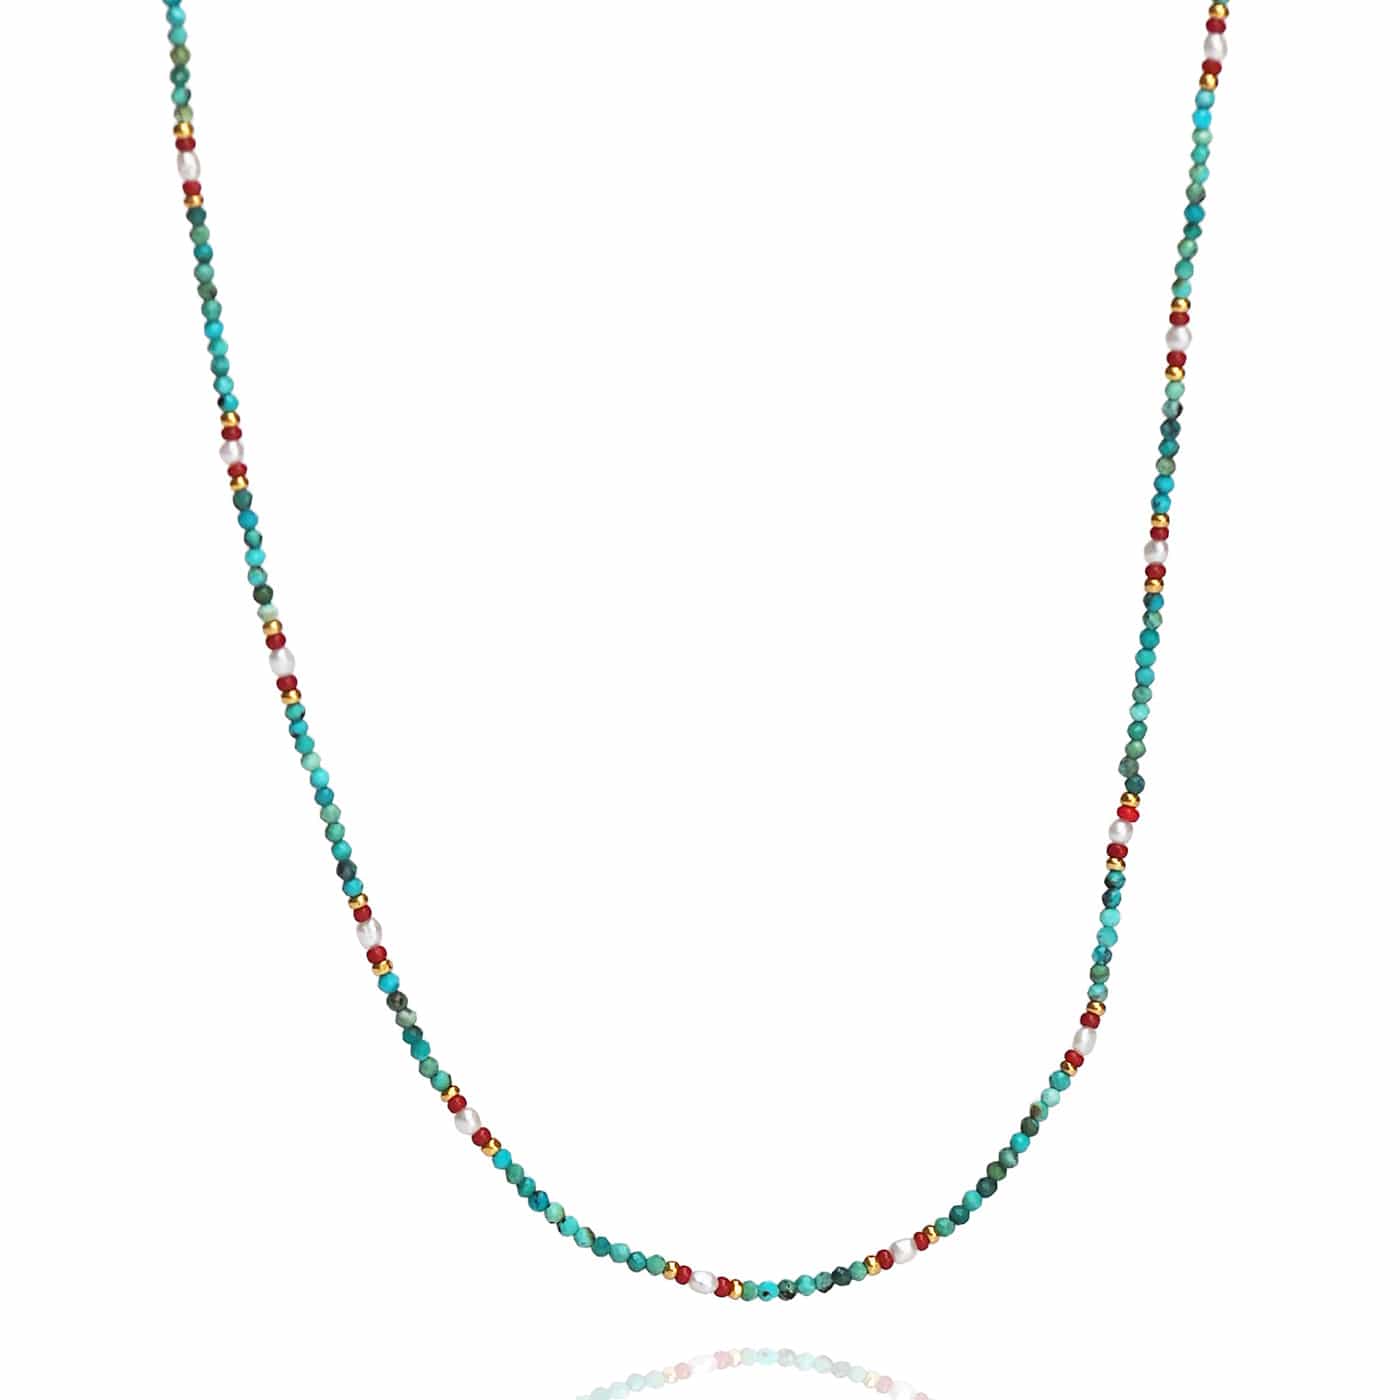 TAI JEWELRY Necklace Turquoise Handmade Beaded Necklace